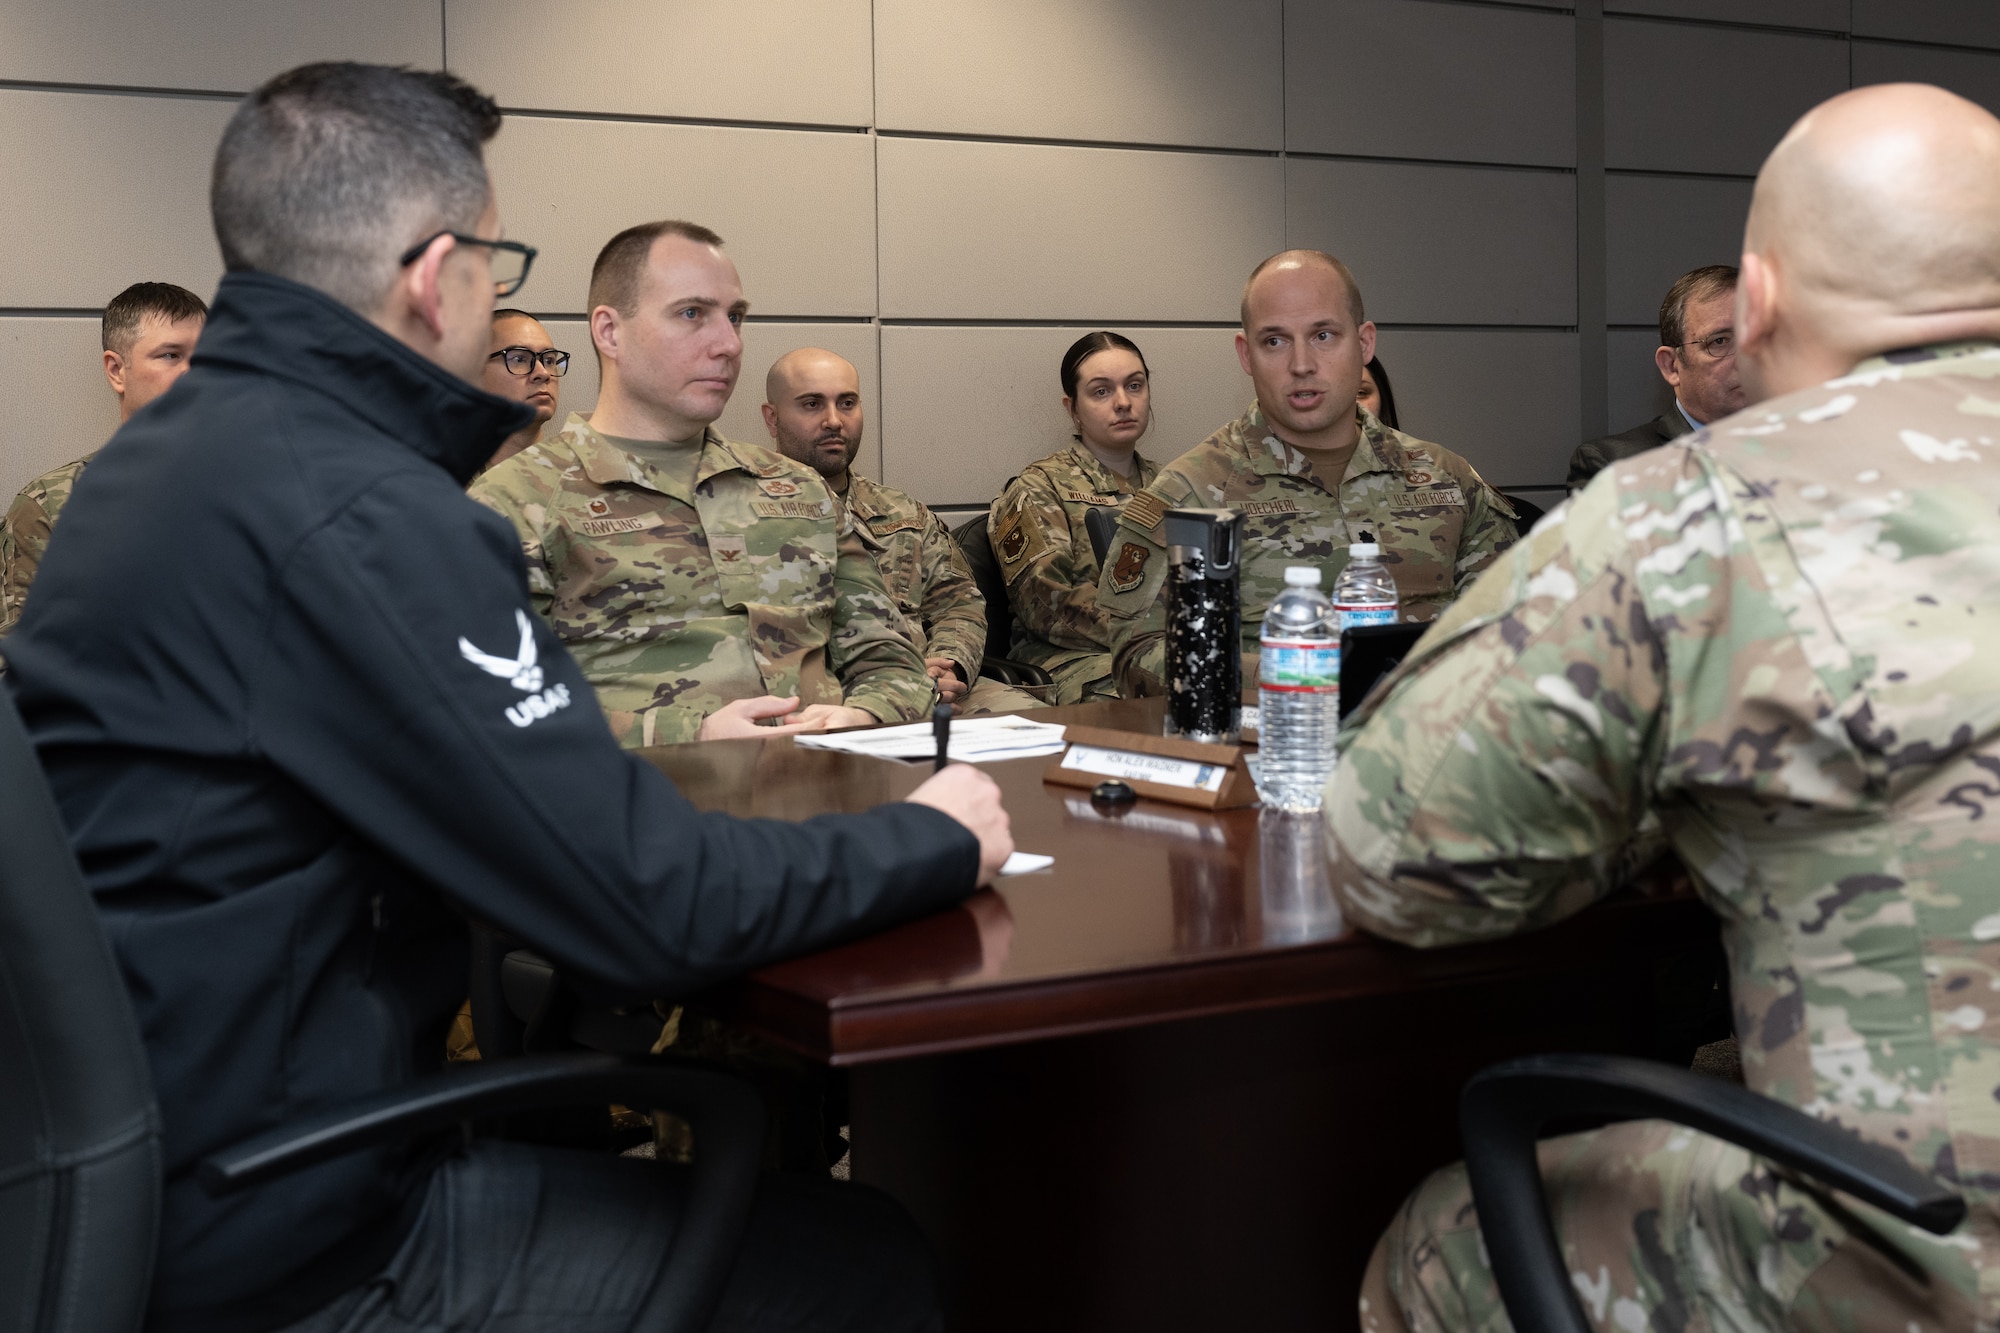 t. Col. Joseph Hoecherl briefs Honorable Alex Wagner, Assistant Secretary of the Air Force for Manpower and Reserve Affairs on Project HIPPOPOTAMUS at the Air Force Manpower Analysis Agency, Joint Base San Antonio-Randolph